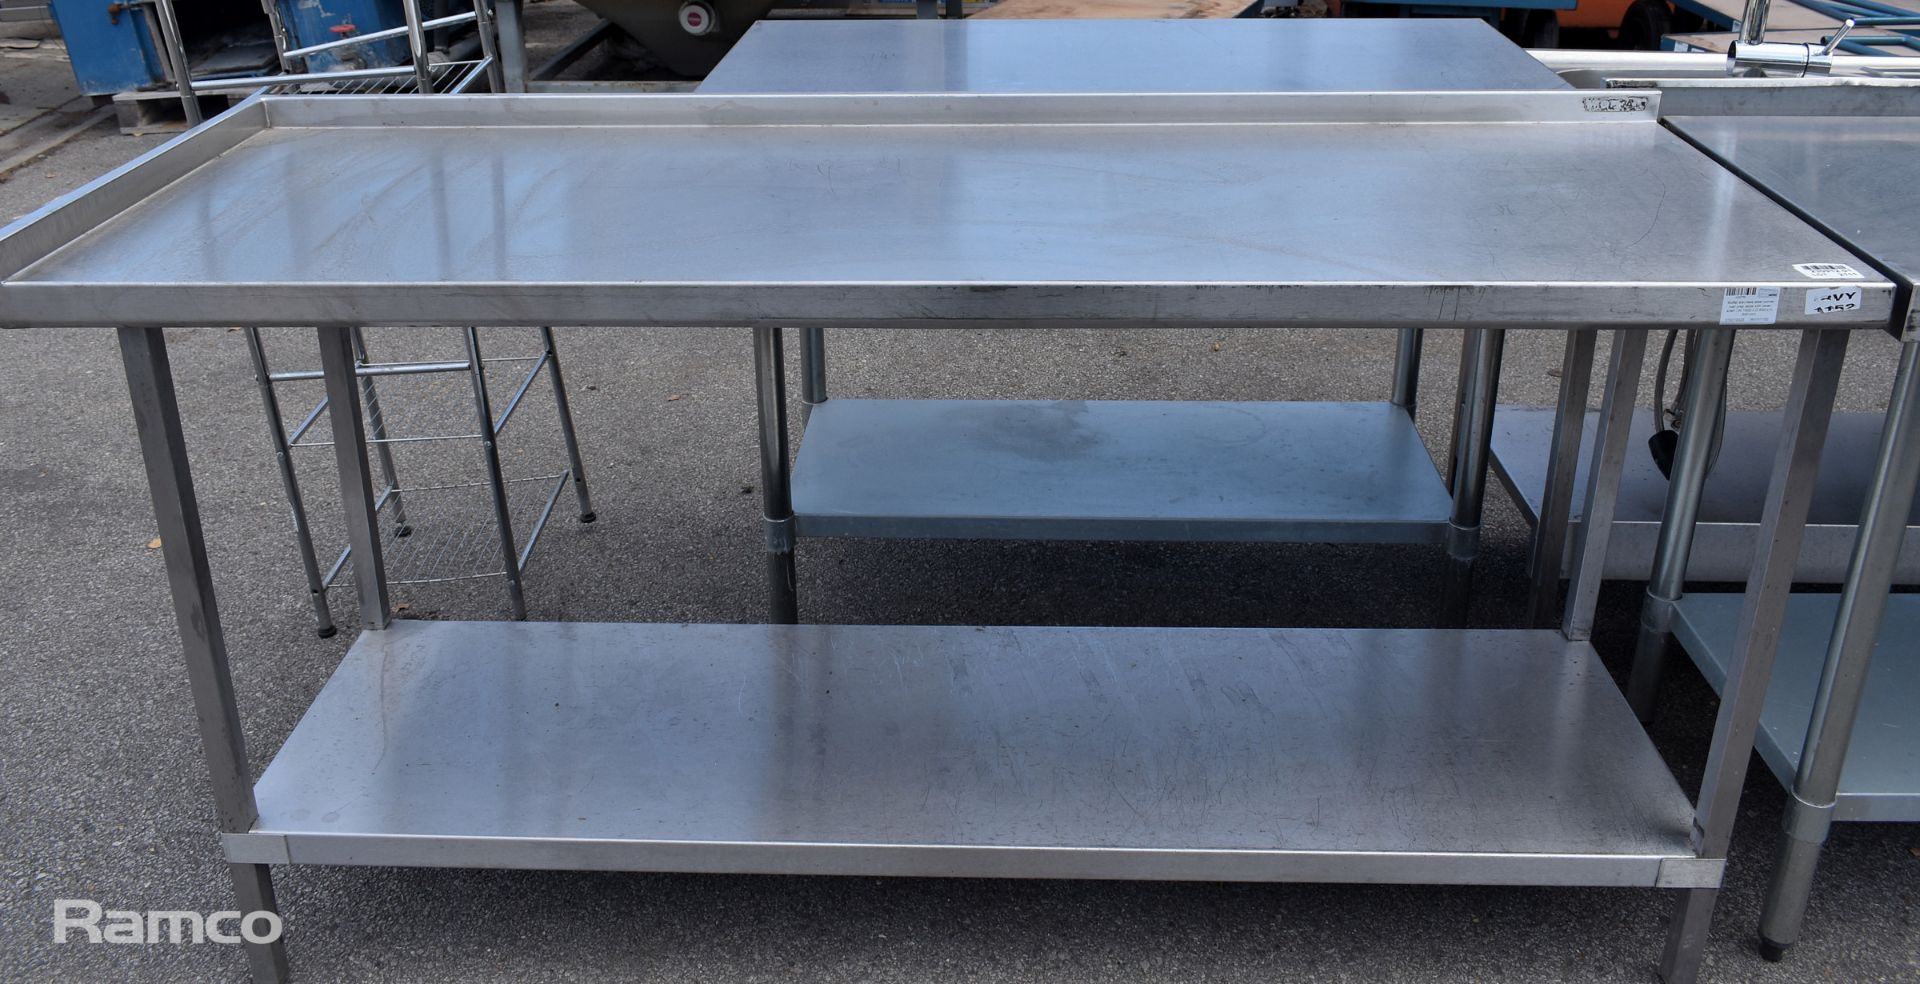 Moffat stainless steel prep table with lower shelf - W 1800 x D 600 x H 930mm